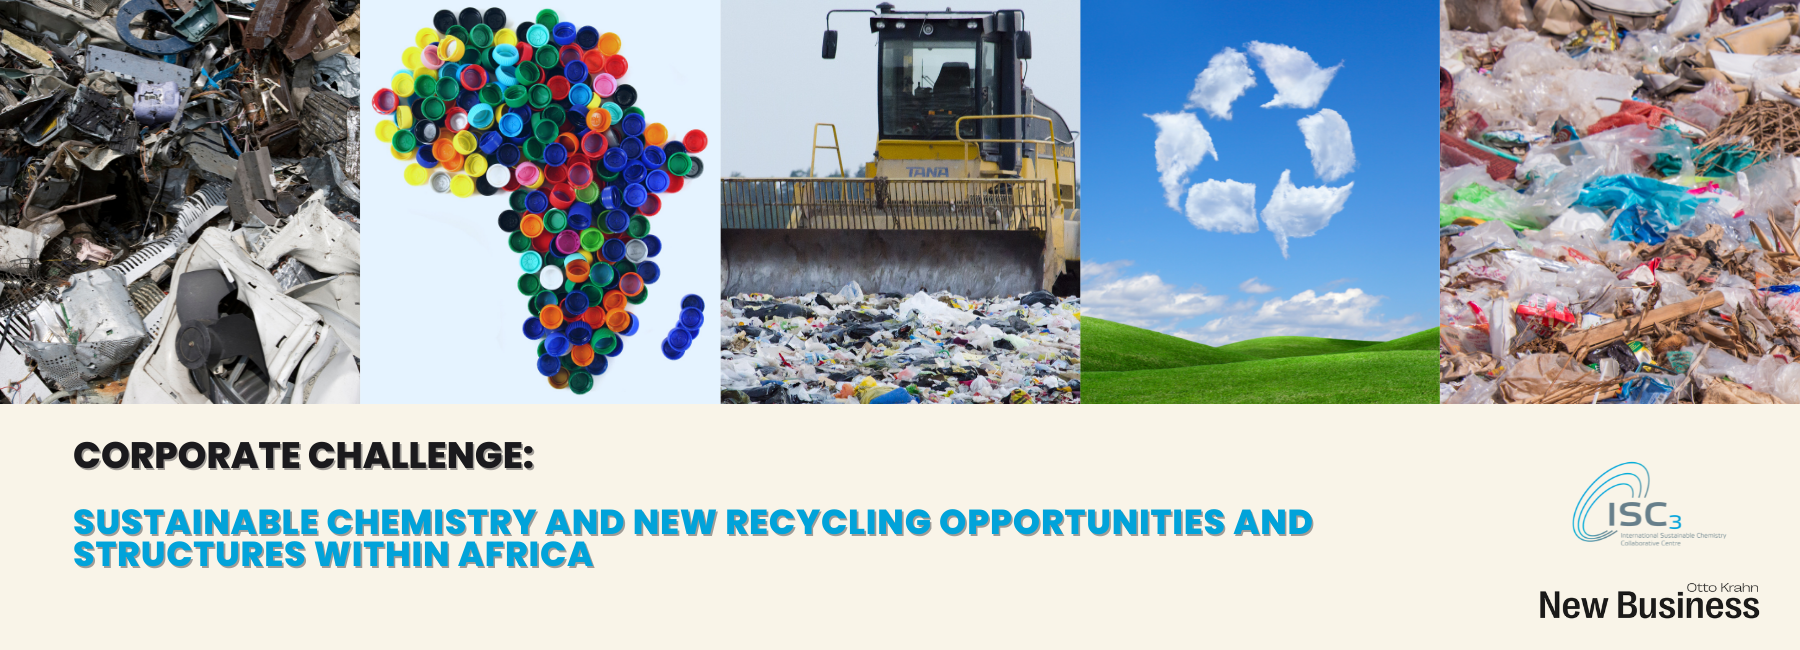 CALL FOR APPLICATIONS FOR THE ISC3 AND OTTO KRAHN NEW BUSINESS CORPORATE CHALLENGE 2022 IN SUSTAINABLE CHEMISTRY AND NEW RECYCLING OPPORTUNITIES AND STRUCTURES WITHIN AFRICA